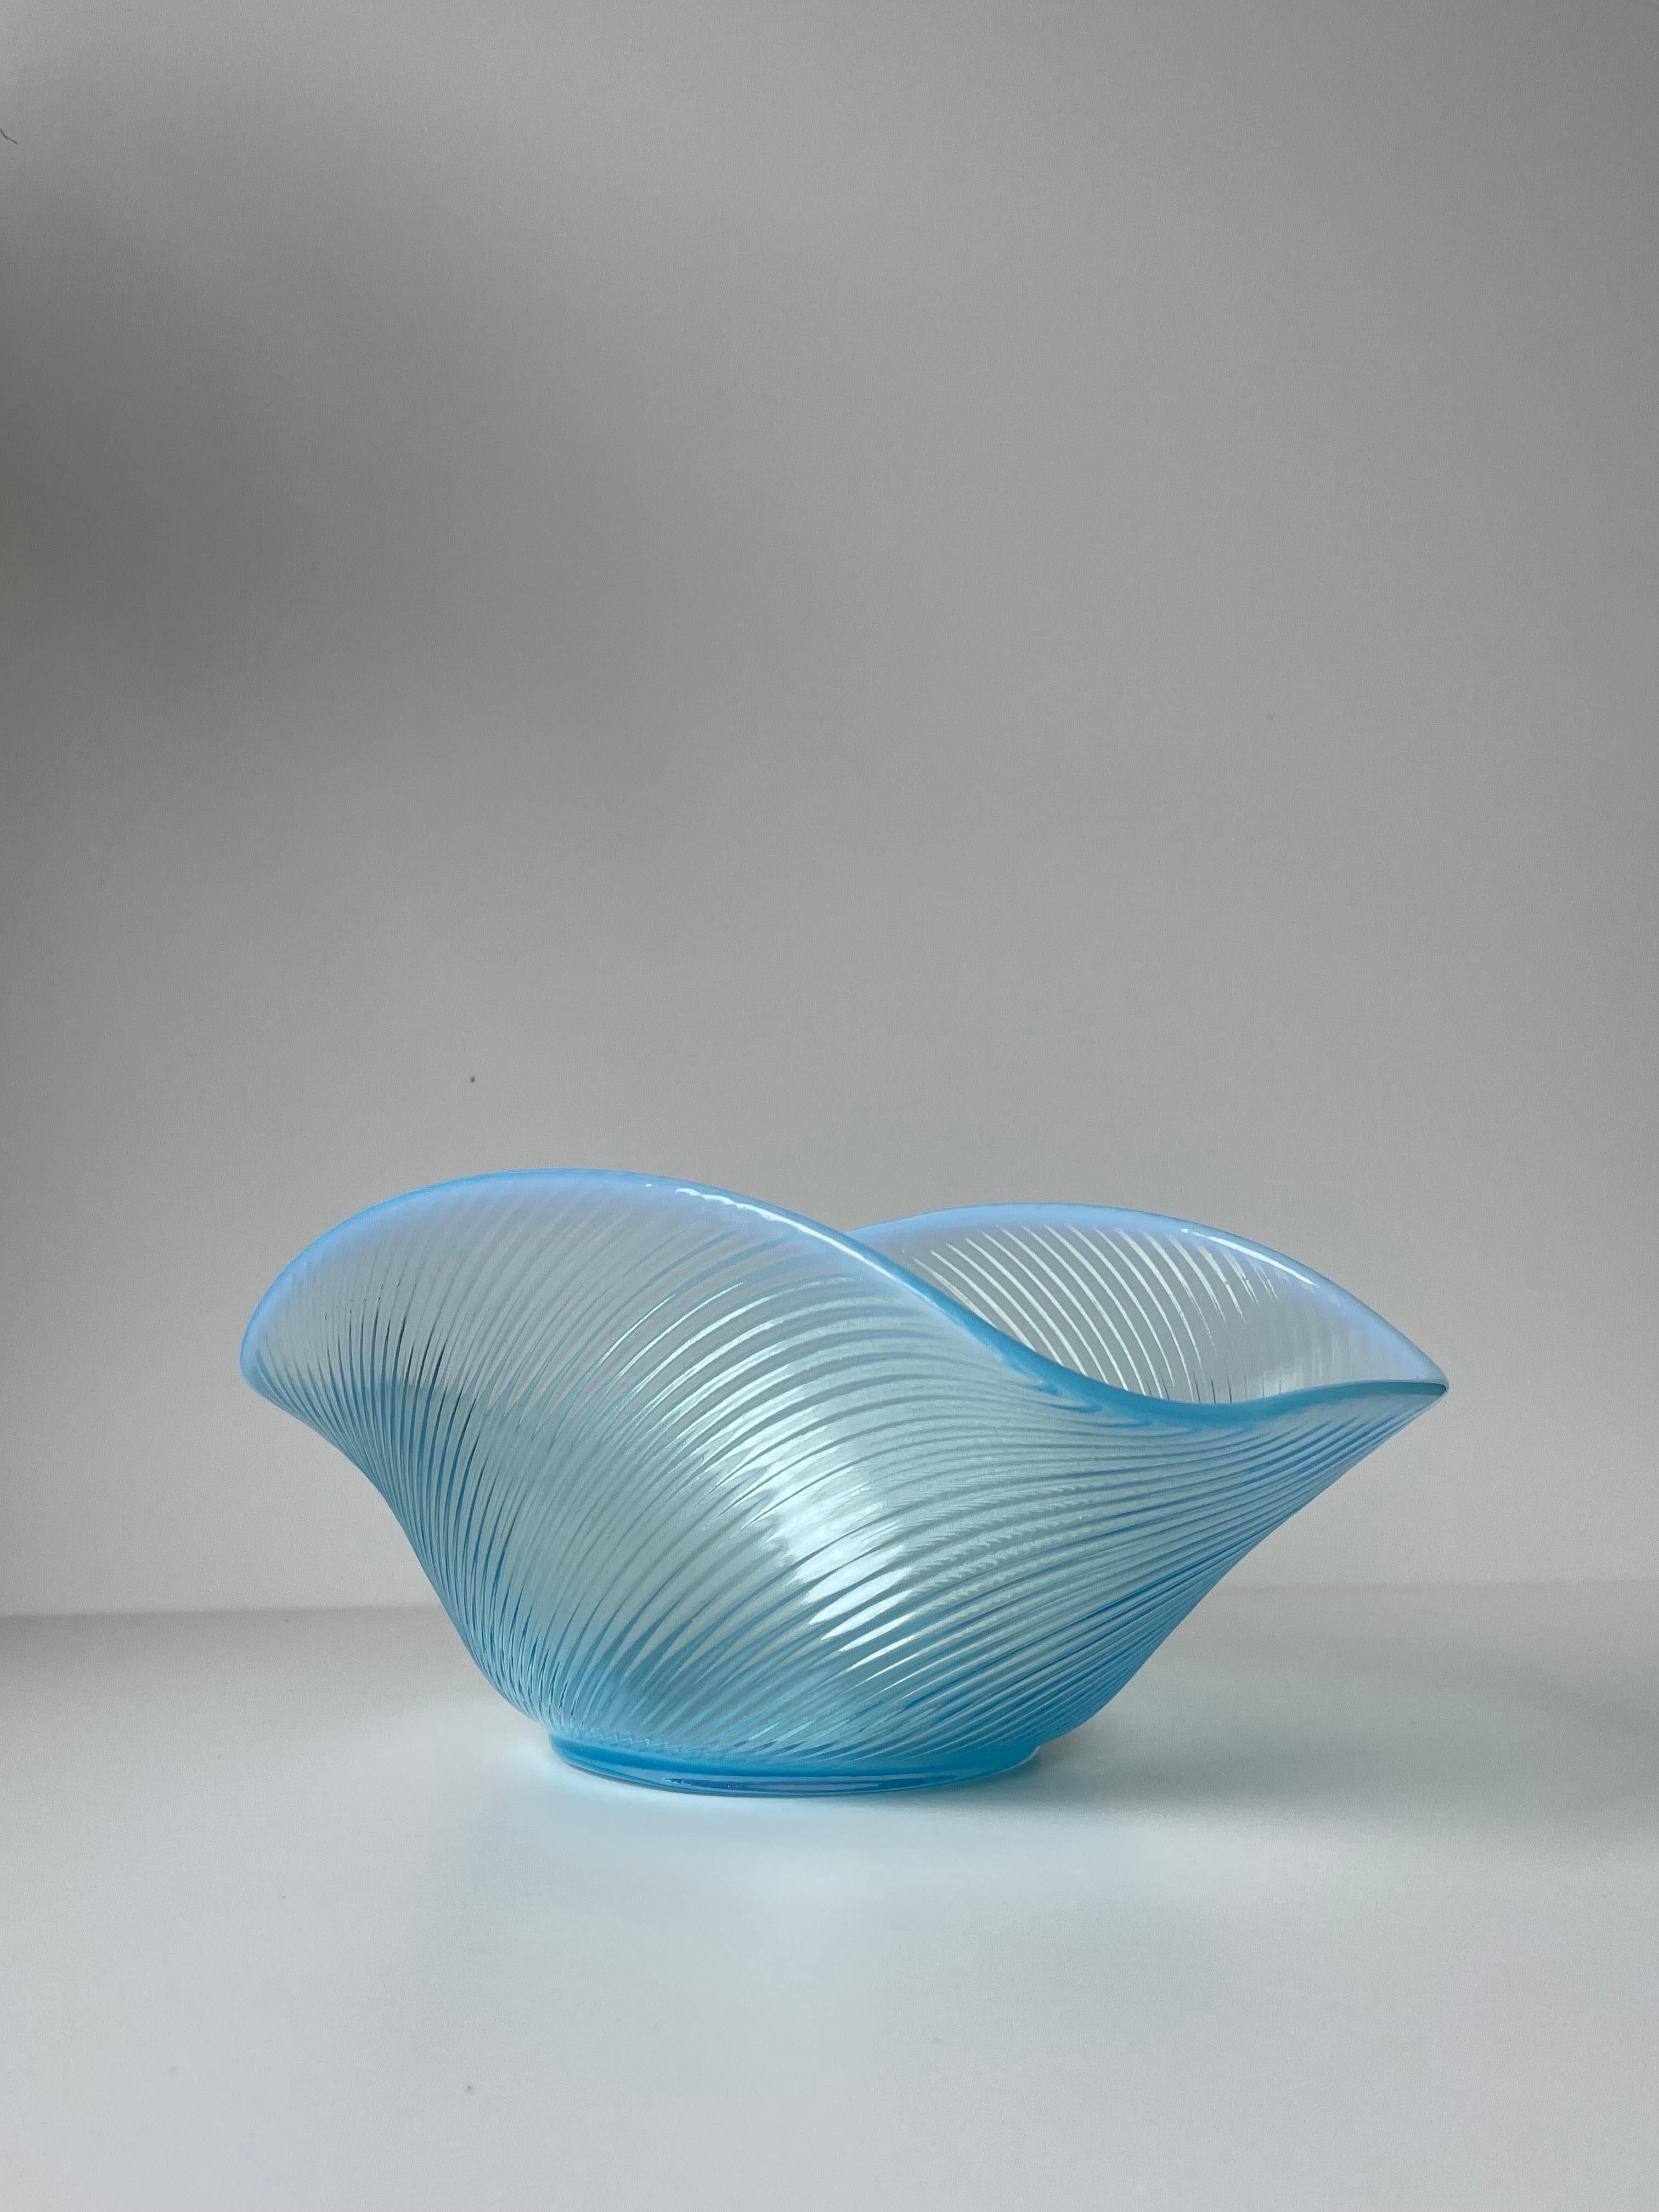 Large and delicate sky blue tinted Swedish midcentury modern textured glass bowl from the Reffla series (reffla is Swedish for grooves) designed by Arthur Percy in 1952. White and light blue opalescent glass constitutes this graceful vessel with